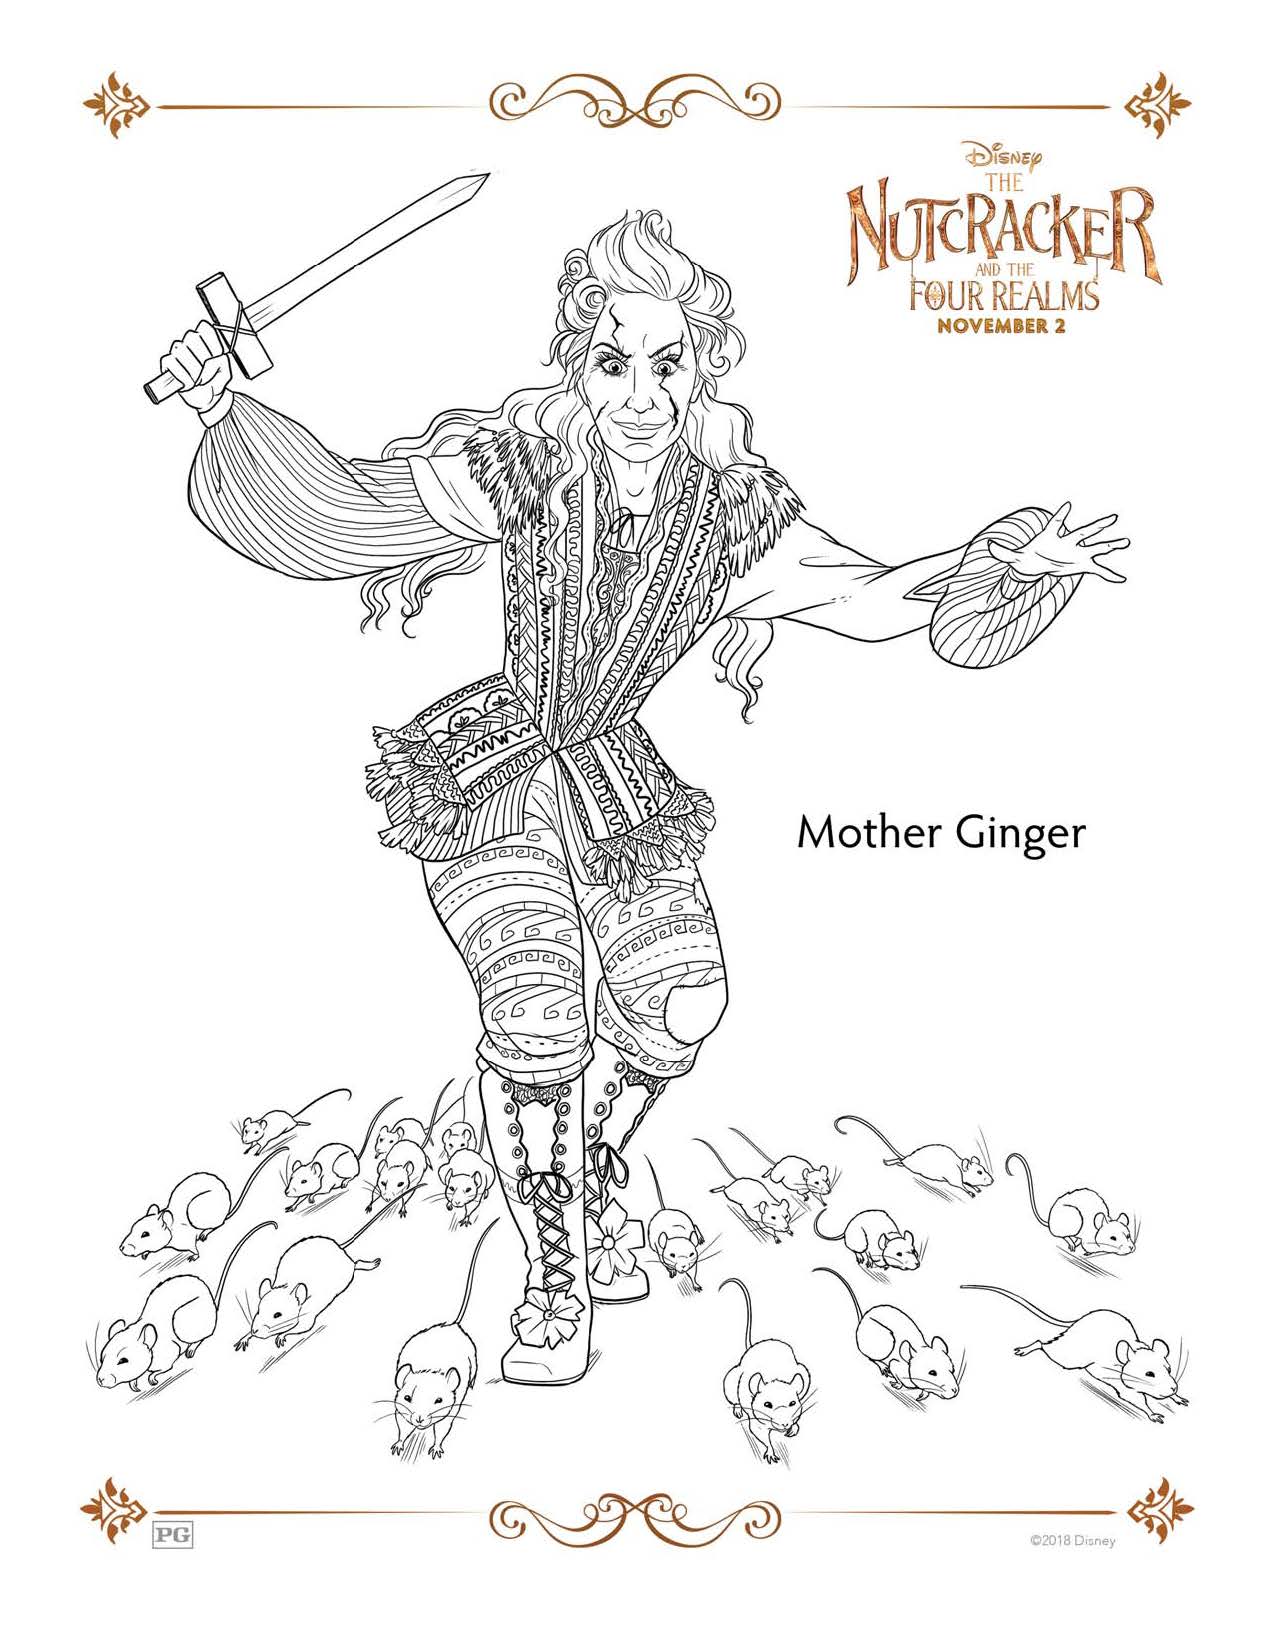 Mother Ginger - The Nutcracker and The Four Realms Coloring Pages and Activity Sheets